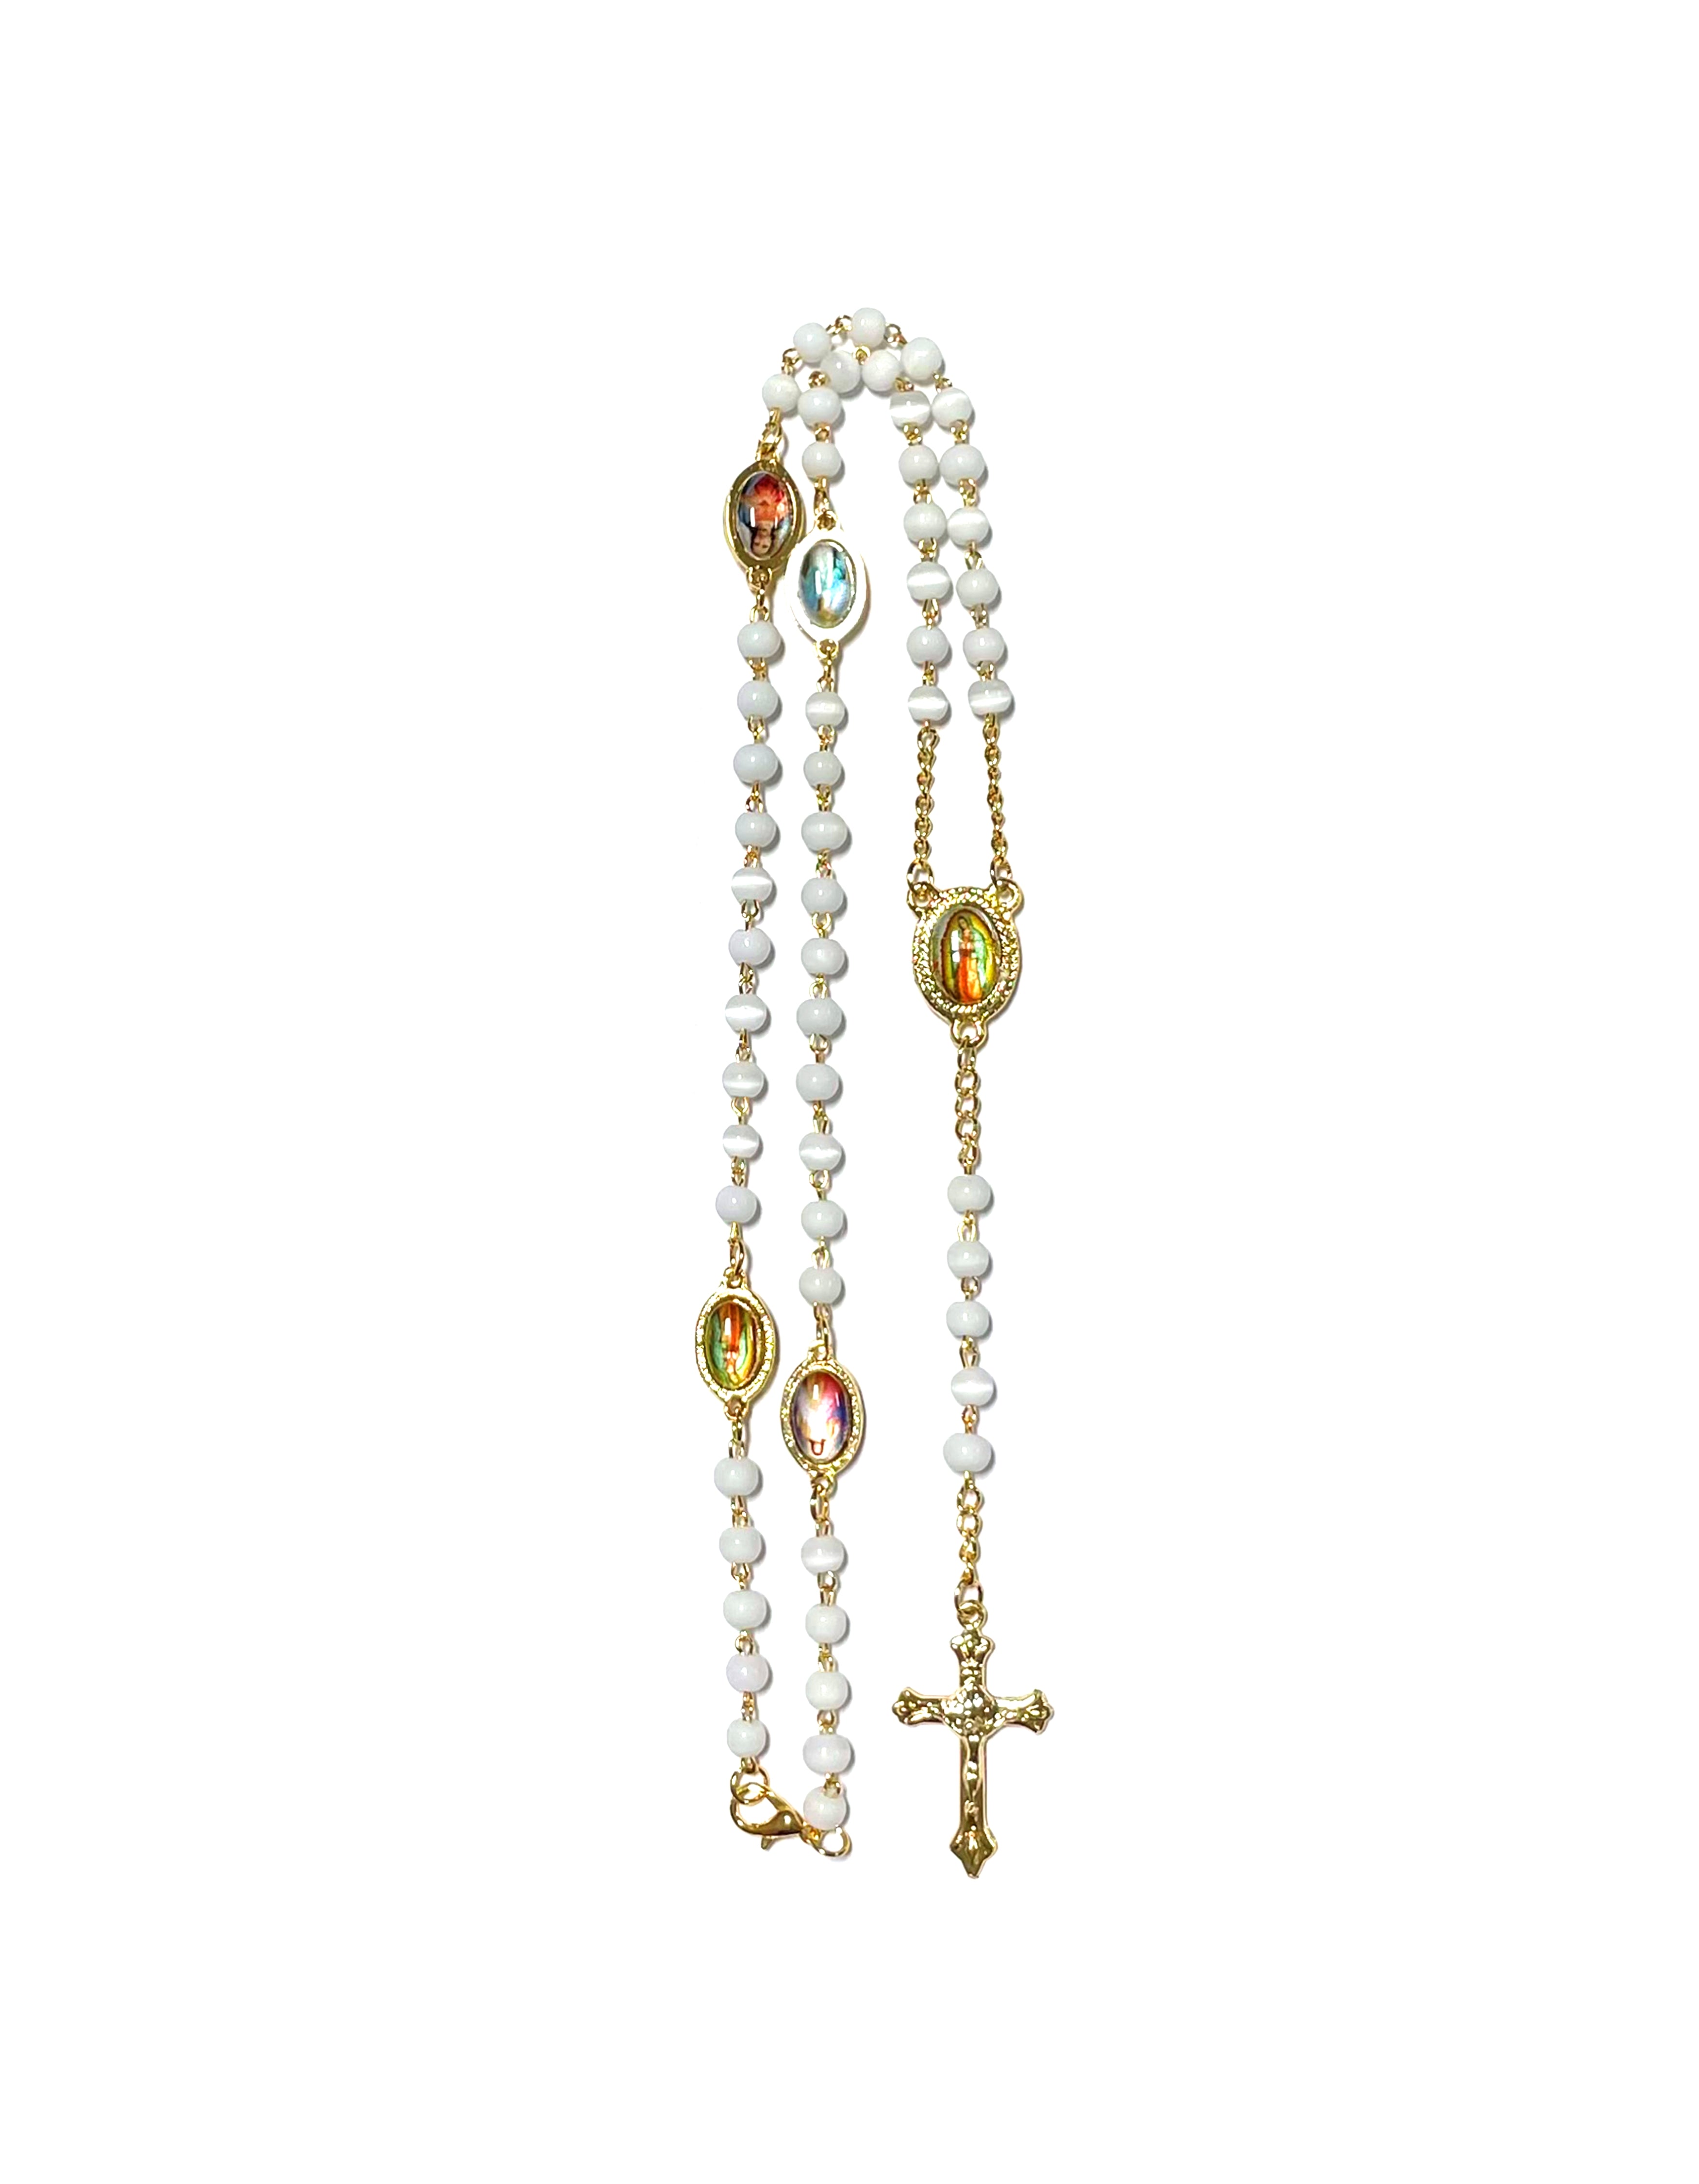 Cat's eye stone rosary with medals of various saints in each mystery